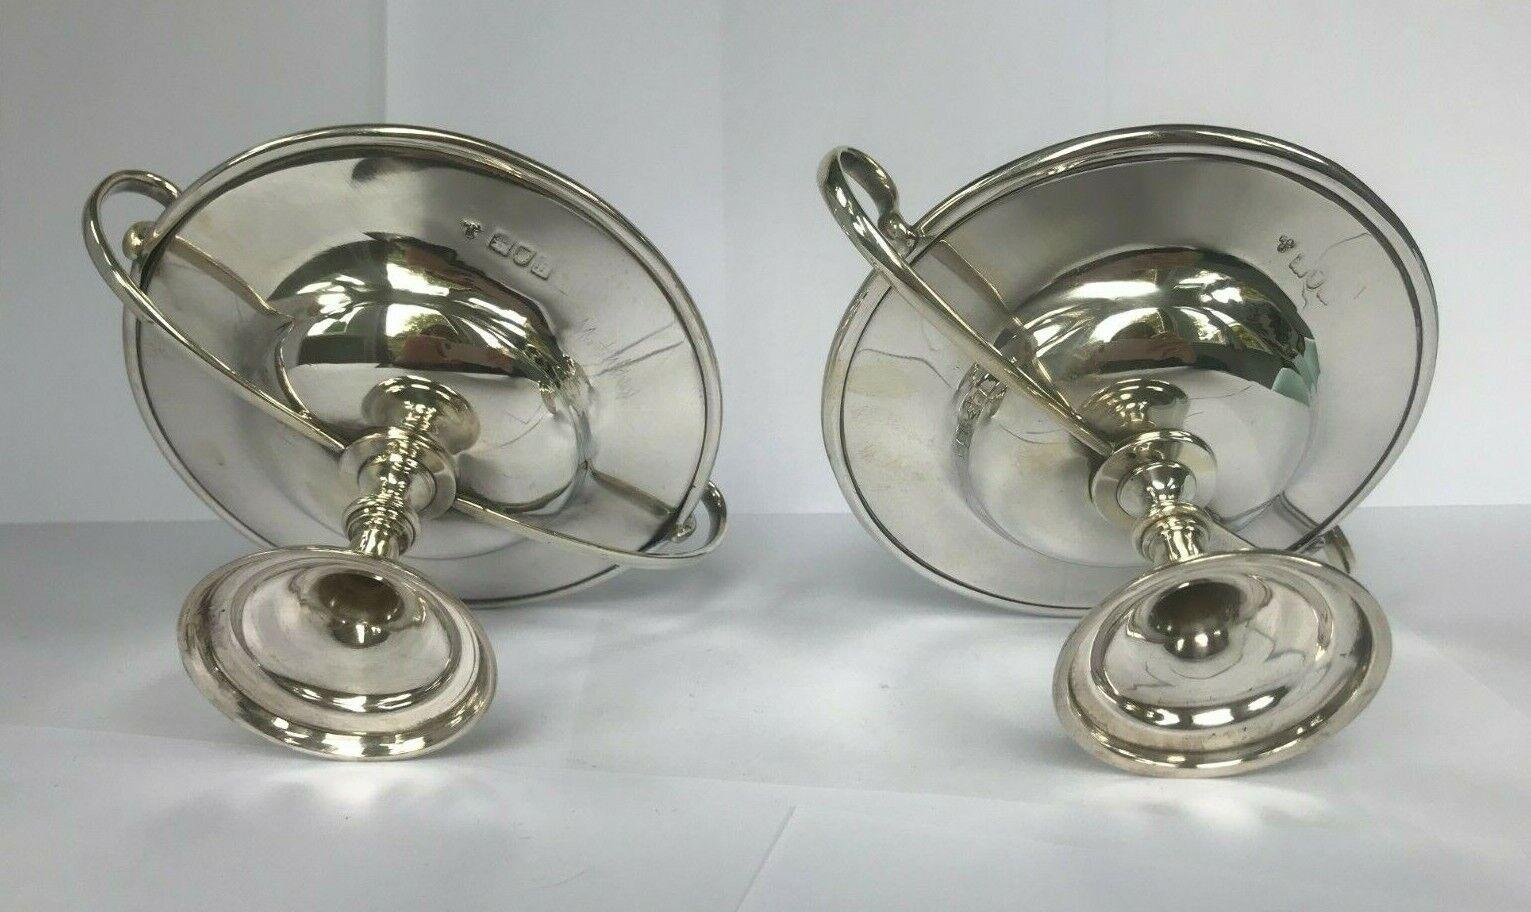 Women's Pair of Sterling Silver Bonbon Dishes by Holland, Aldwinckle & Slater, 1903 For Sale